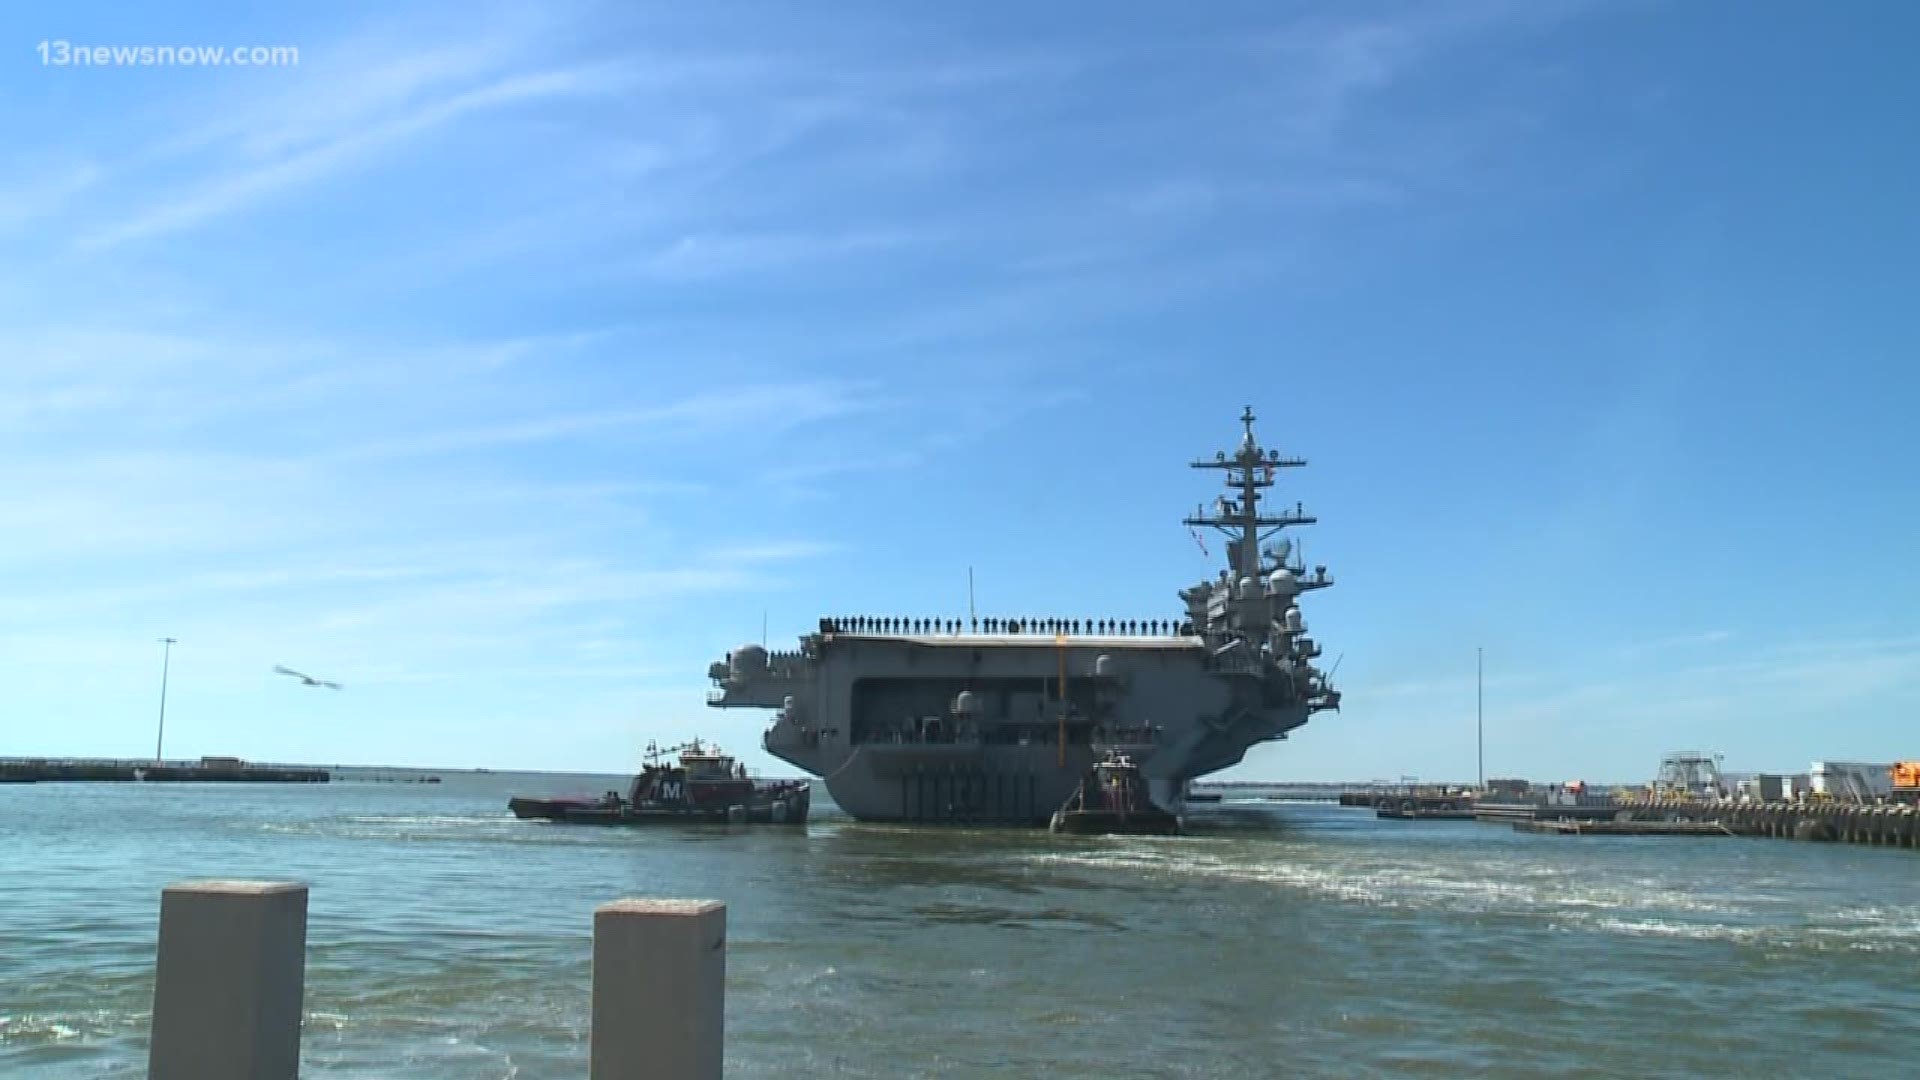 The USS Abraham Lincoln left for a seven-month deployment, but it will not return to Hampton Roads. Instead it will go to it's new homeport on the West Coast.